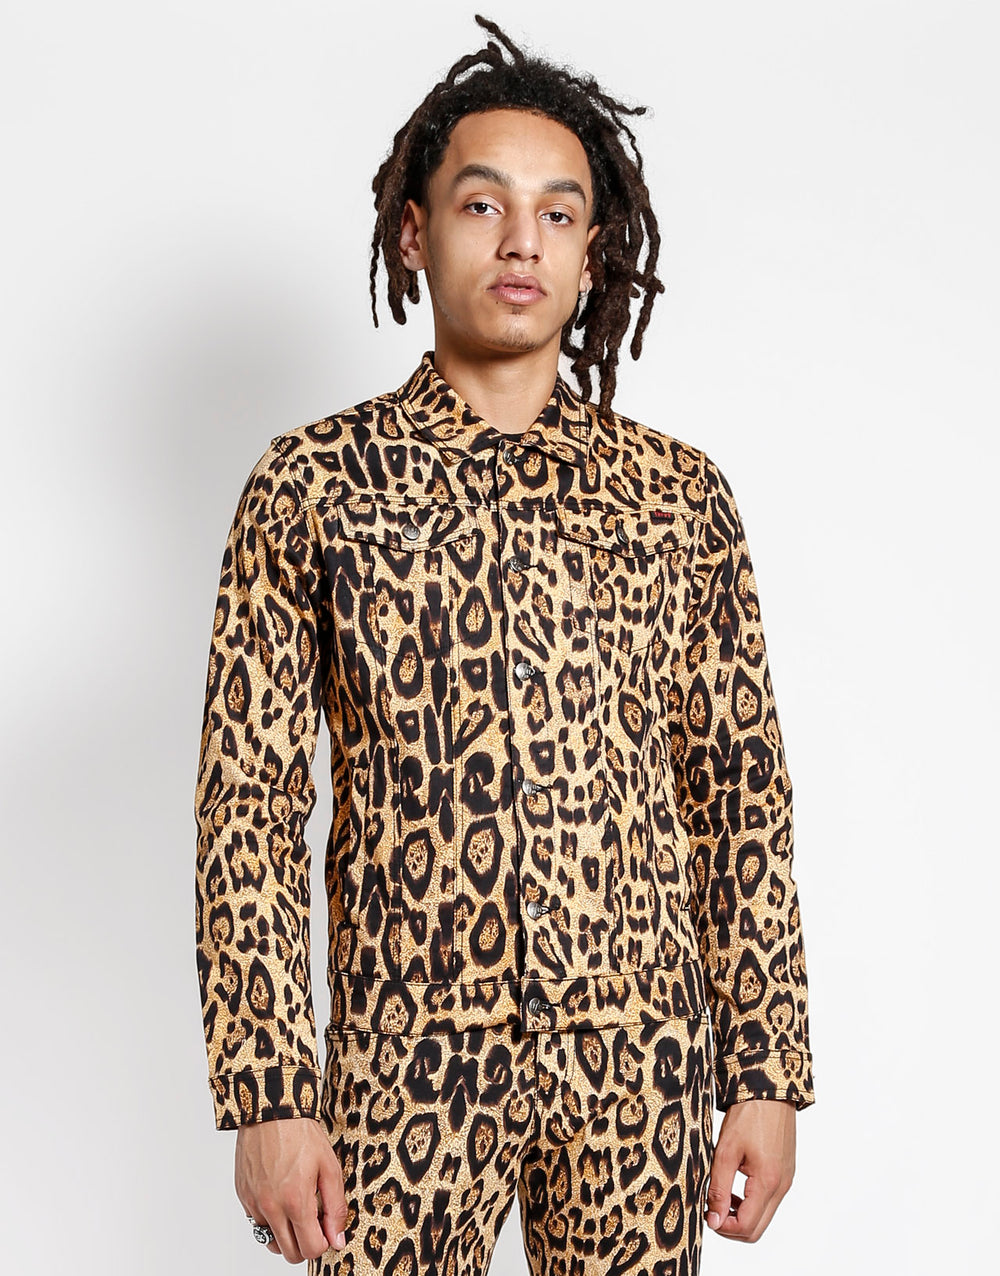 Leopard Print Mens Winter Overcoat For Men With Thick Fur Collar Warm Faux  Parka Coat For Outwear And Cardigan Wear From Jaydaxia, $57.07 | DHgate.Com